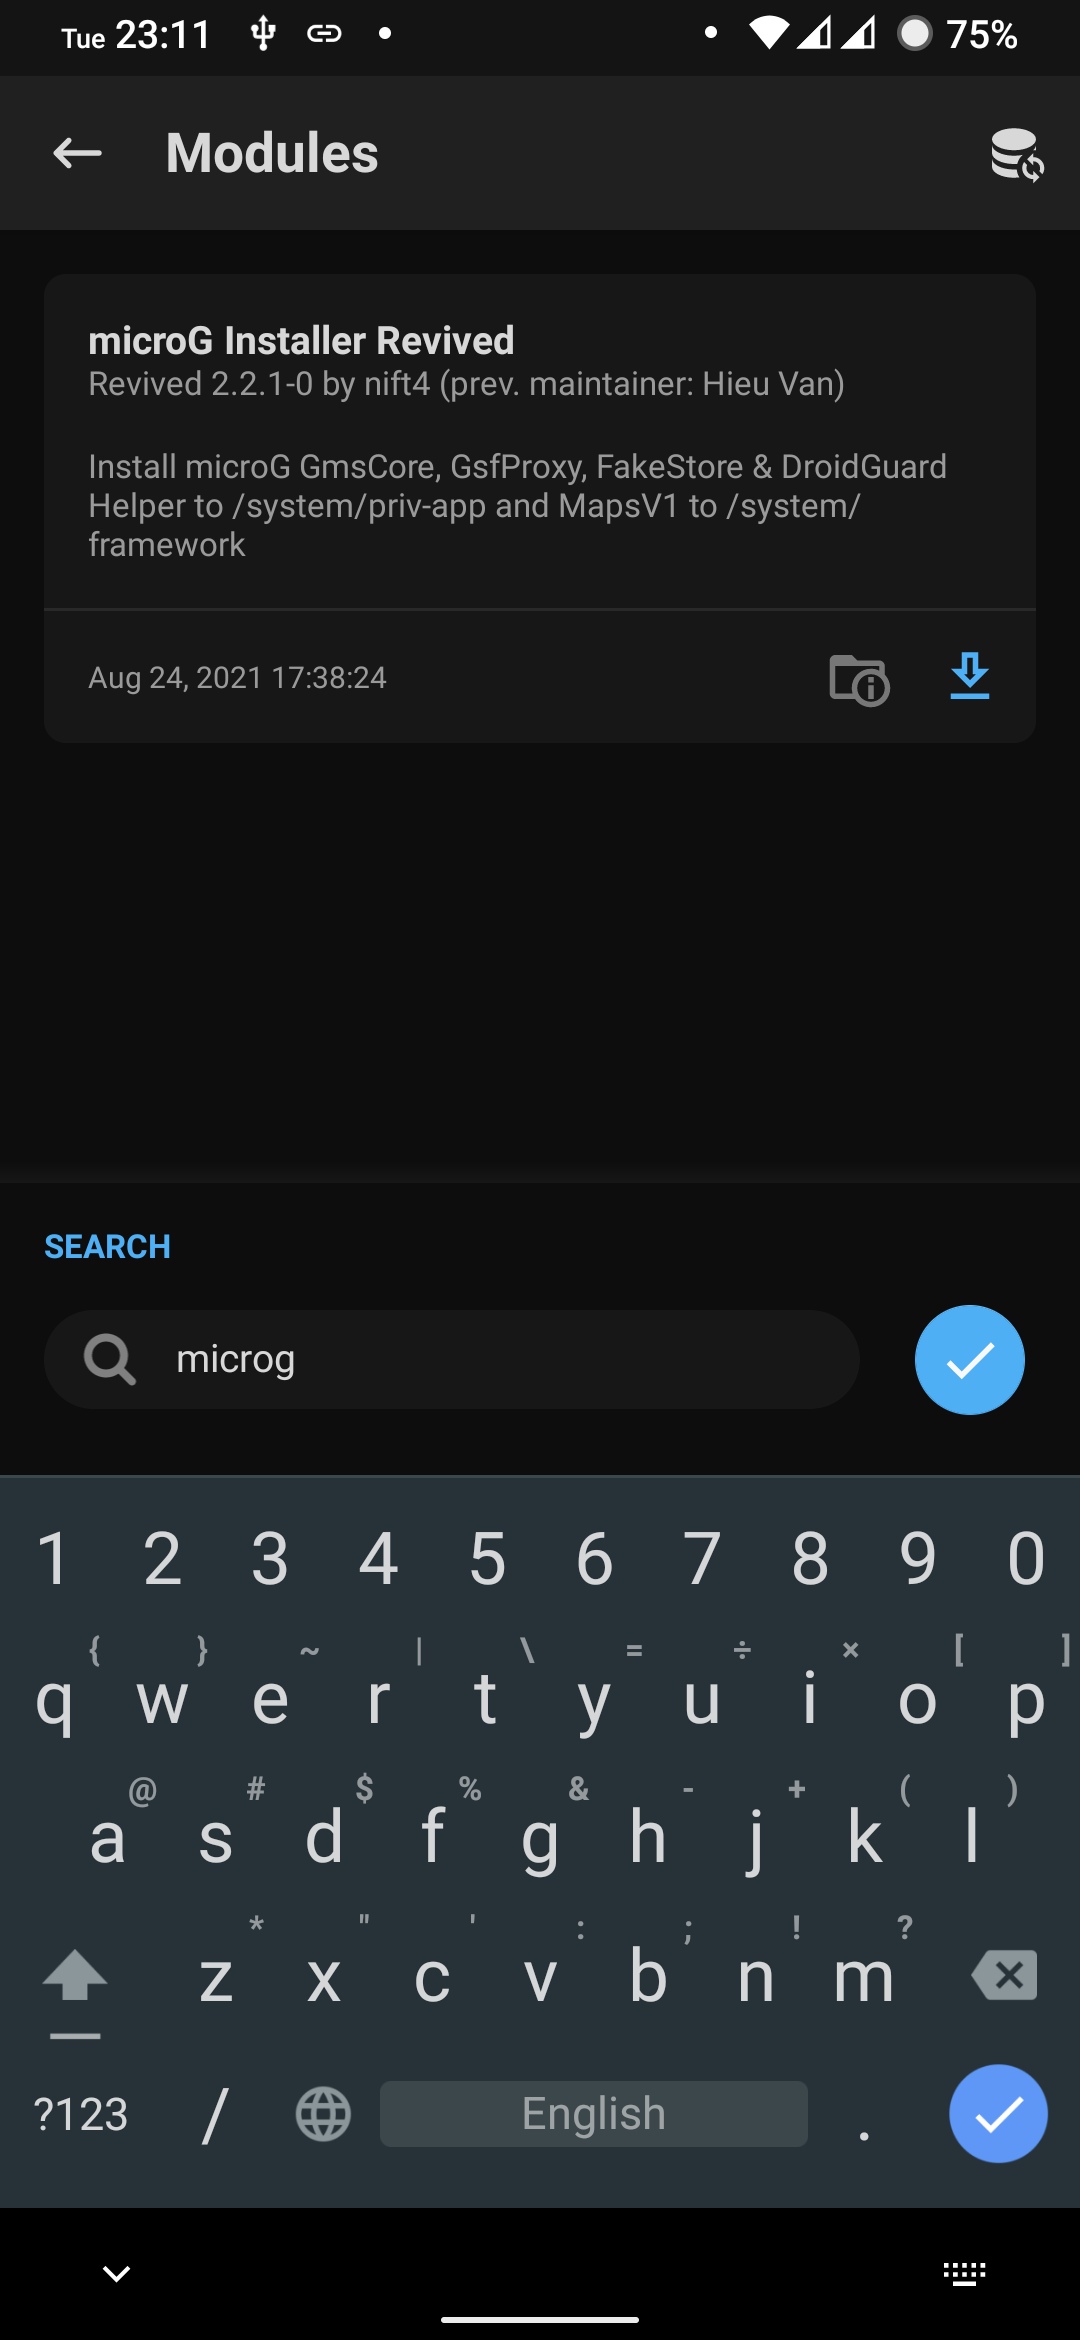 crdroid-android-rom-xiaomi-redmi-9-magisk-microg